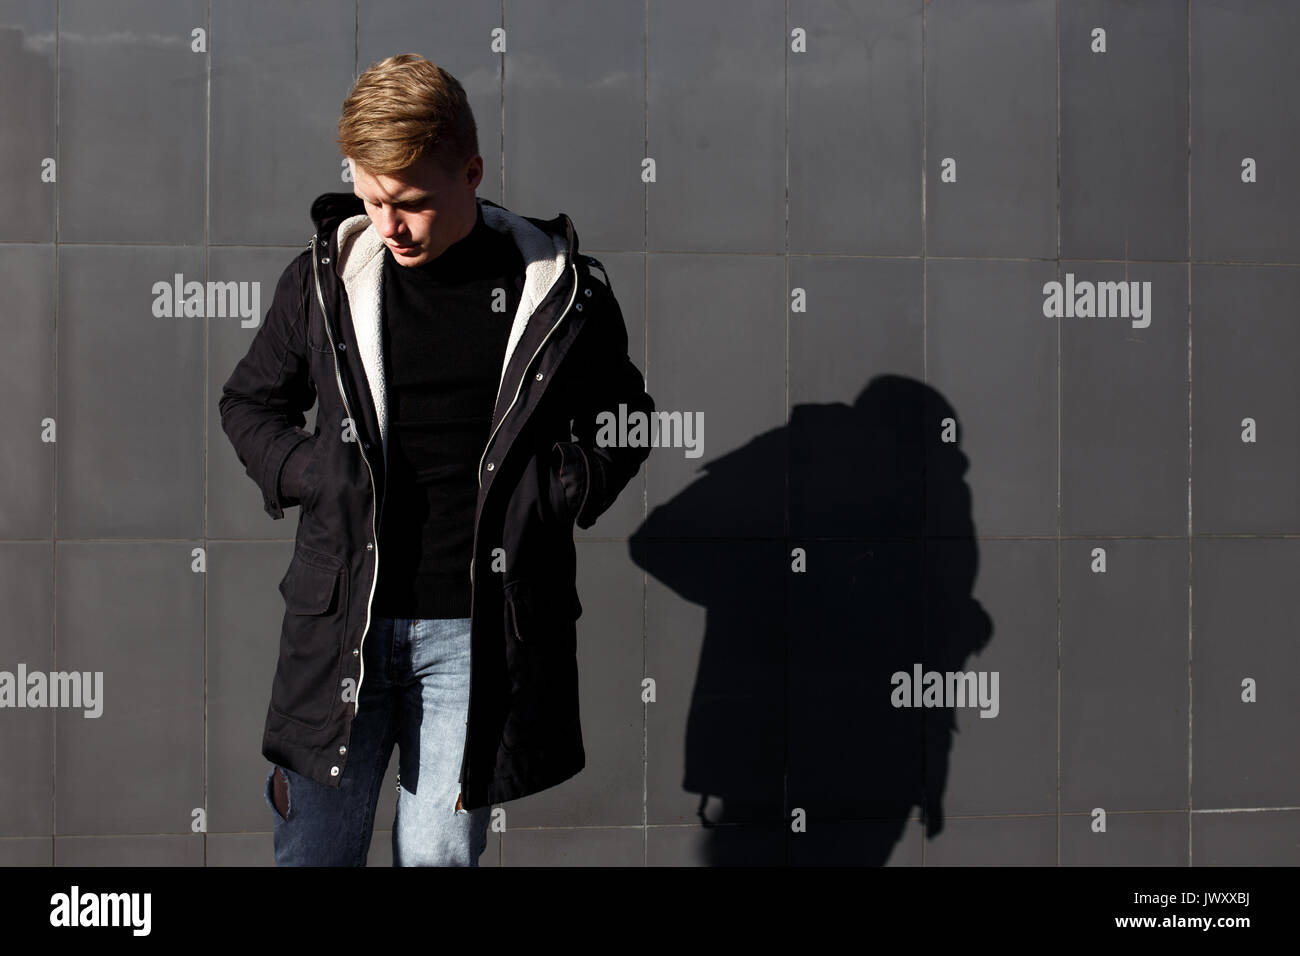 Young stylish redhead man in trendy outfit posing against urban background Stock Photo